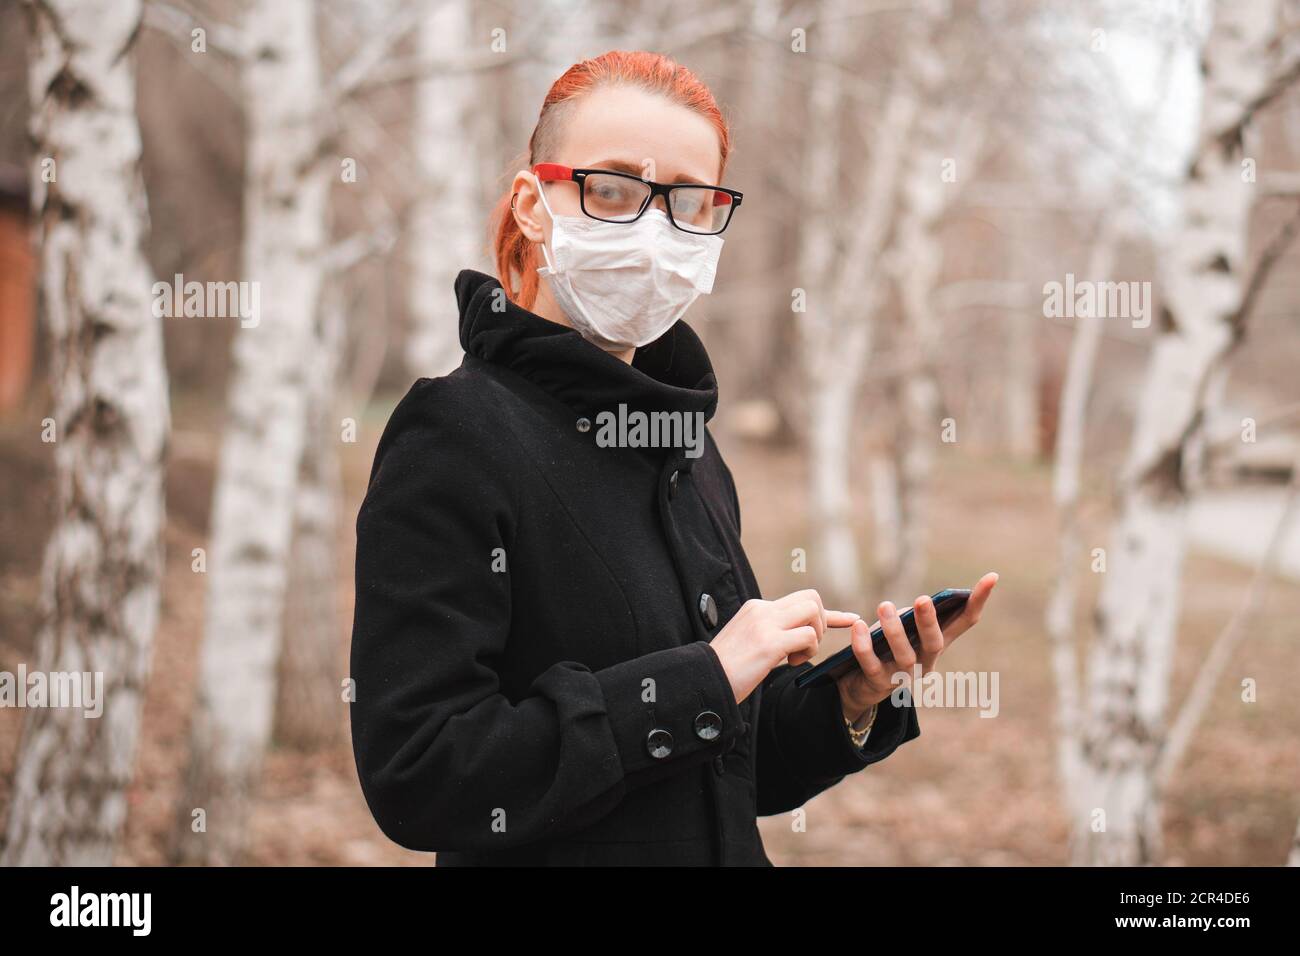 Coronavirus and health care concept with space for text. Young woman in mask holds phone in hand in park and looks at camera. Stock Photo